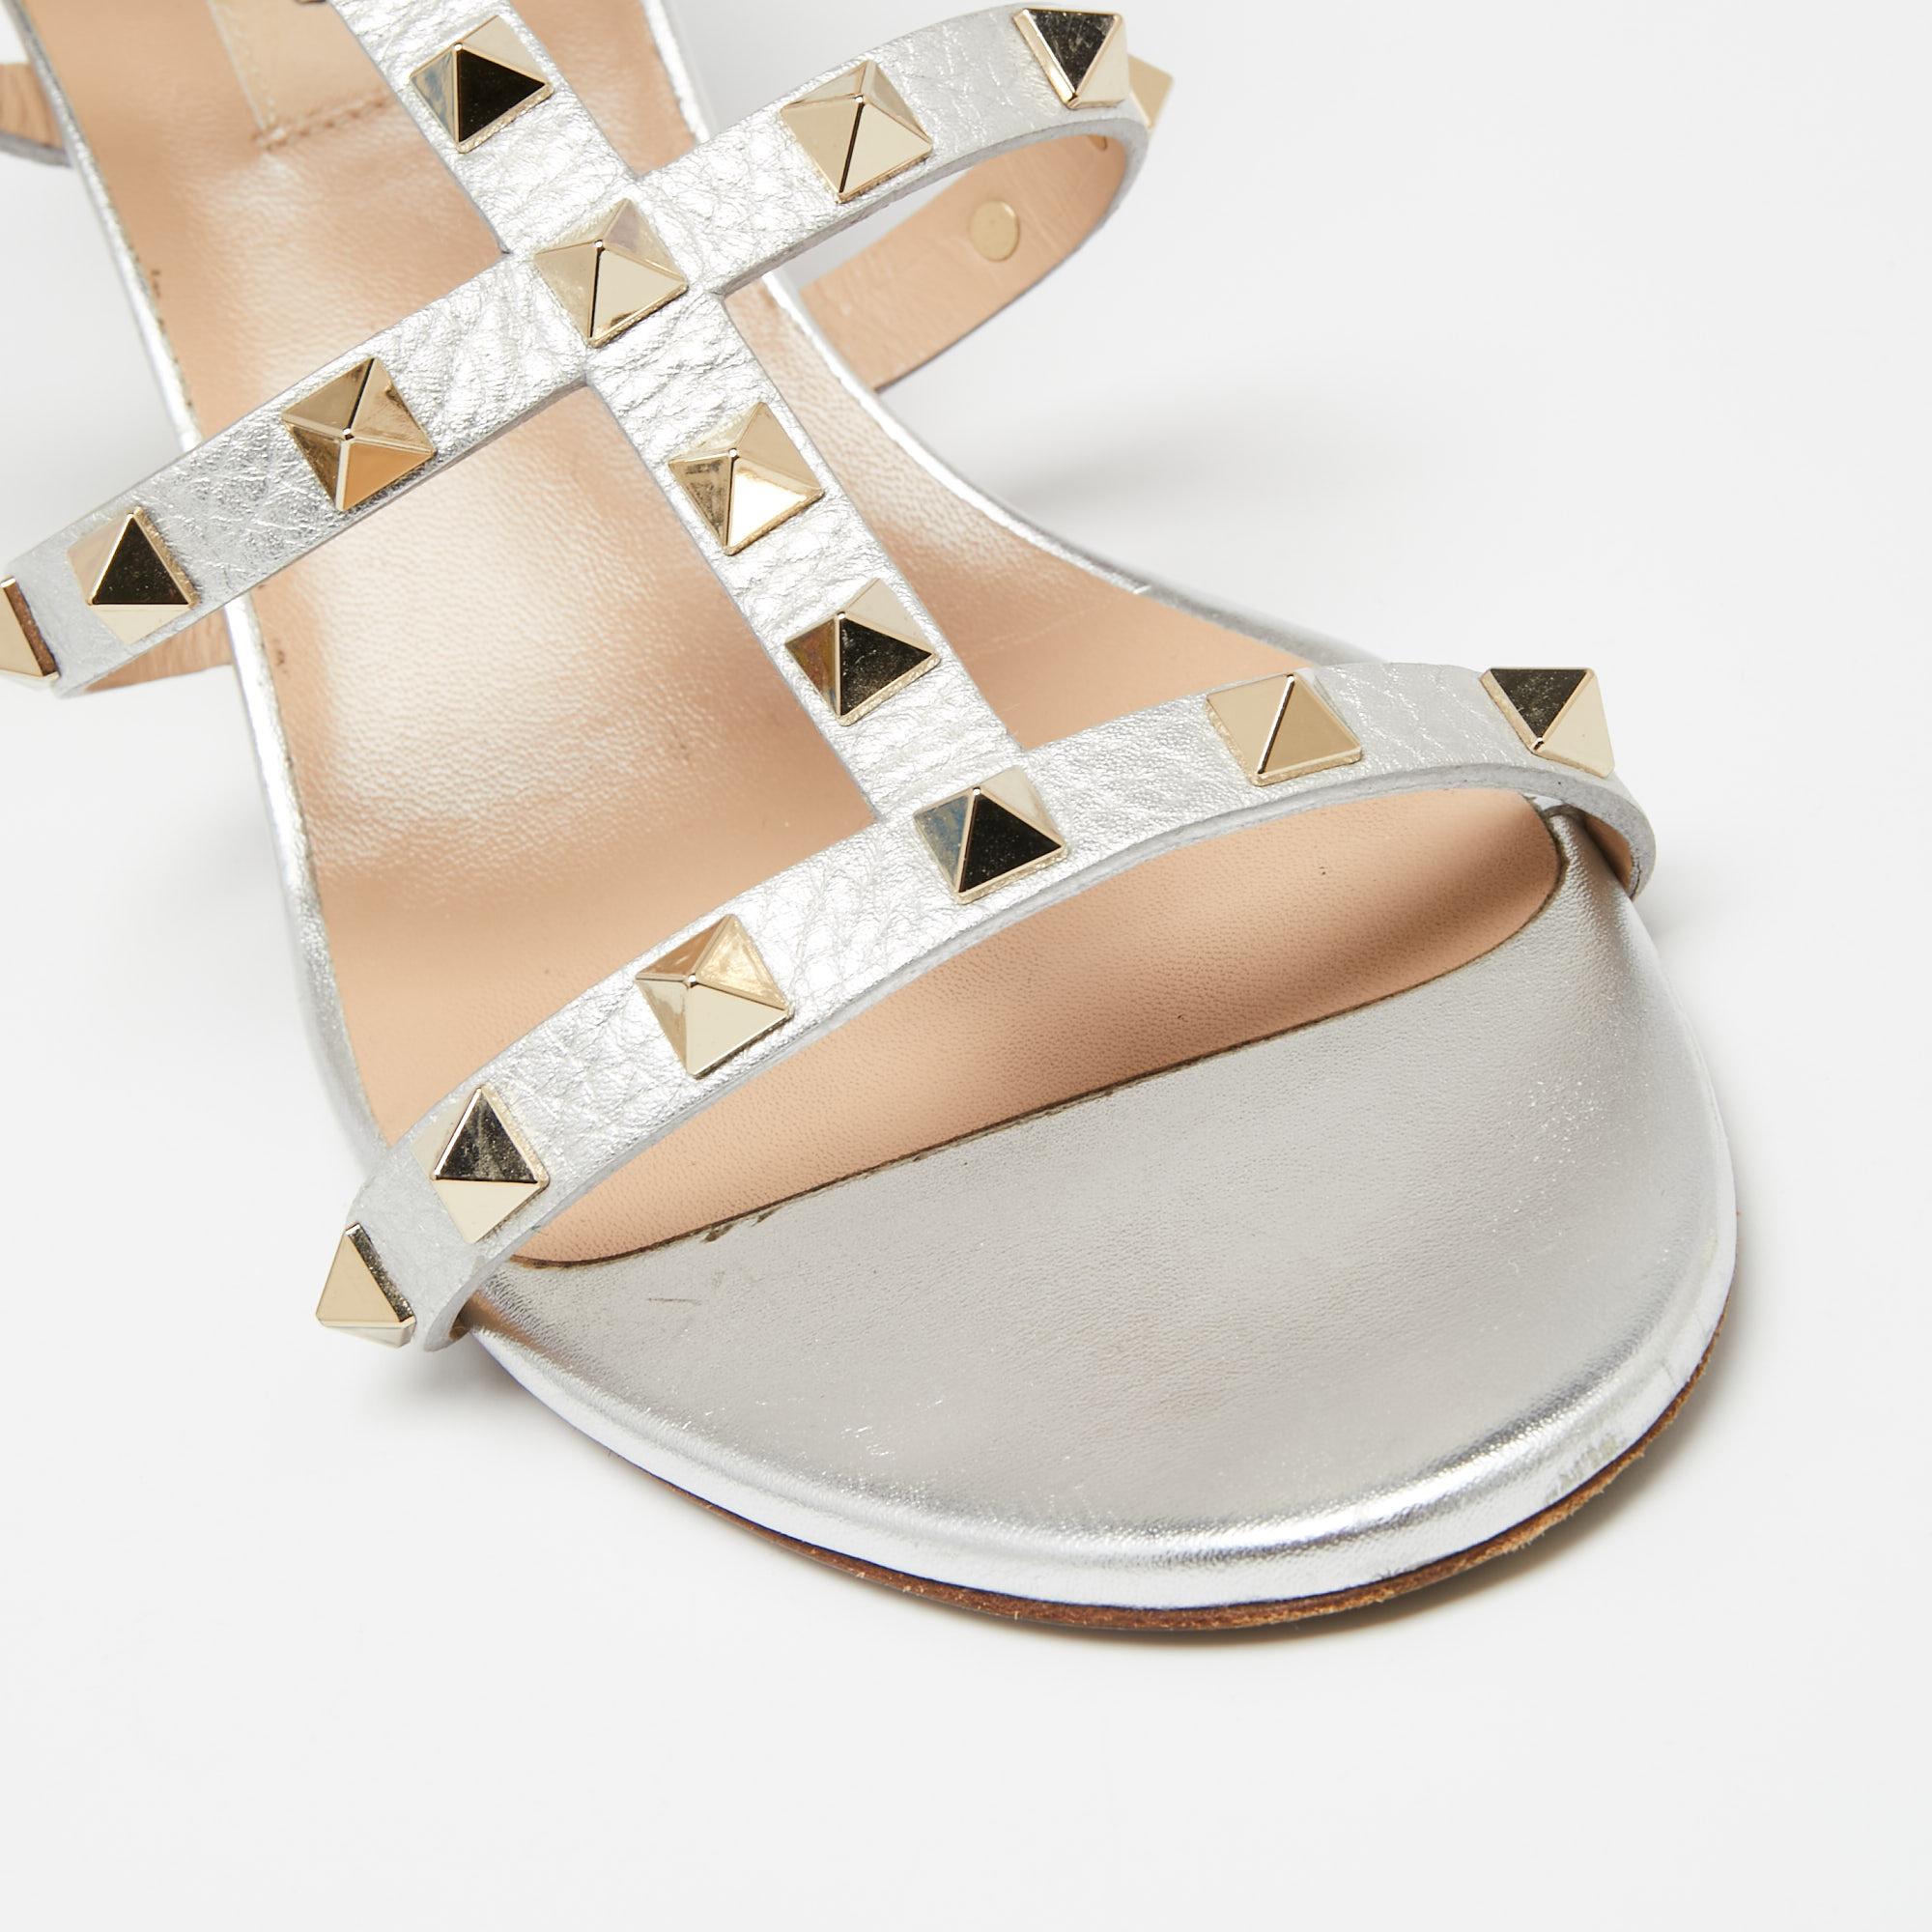 Valentino Silver Leather Rockstud Cage Sandals Size 38 2